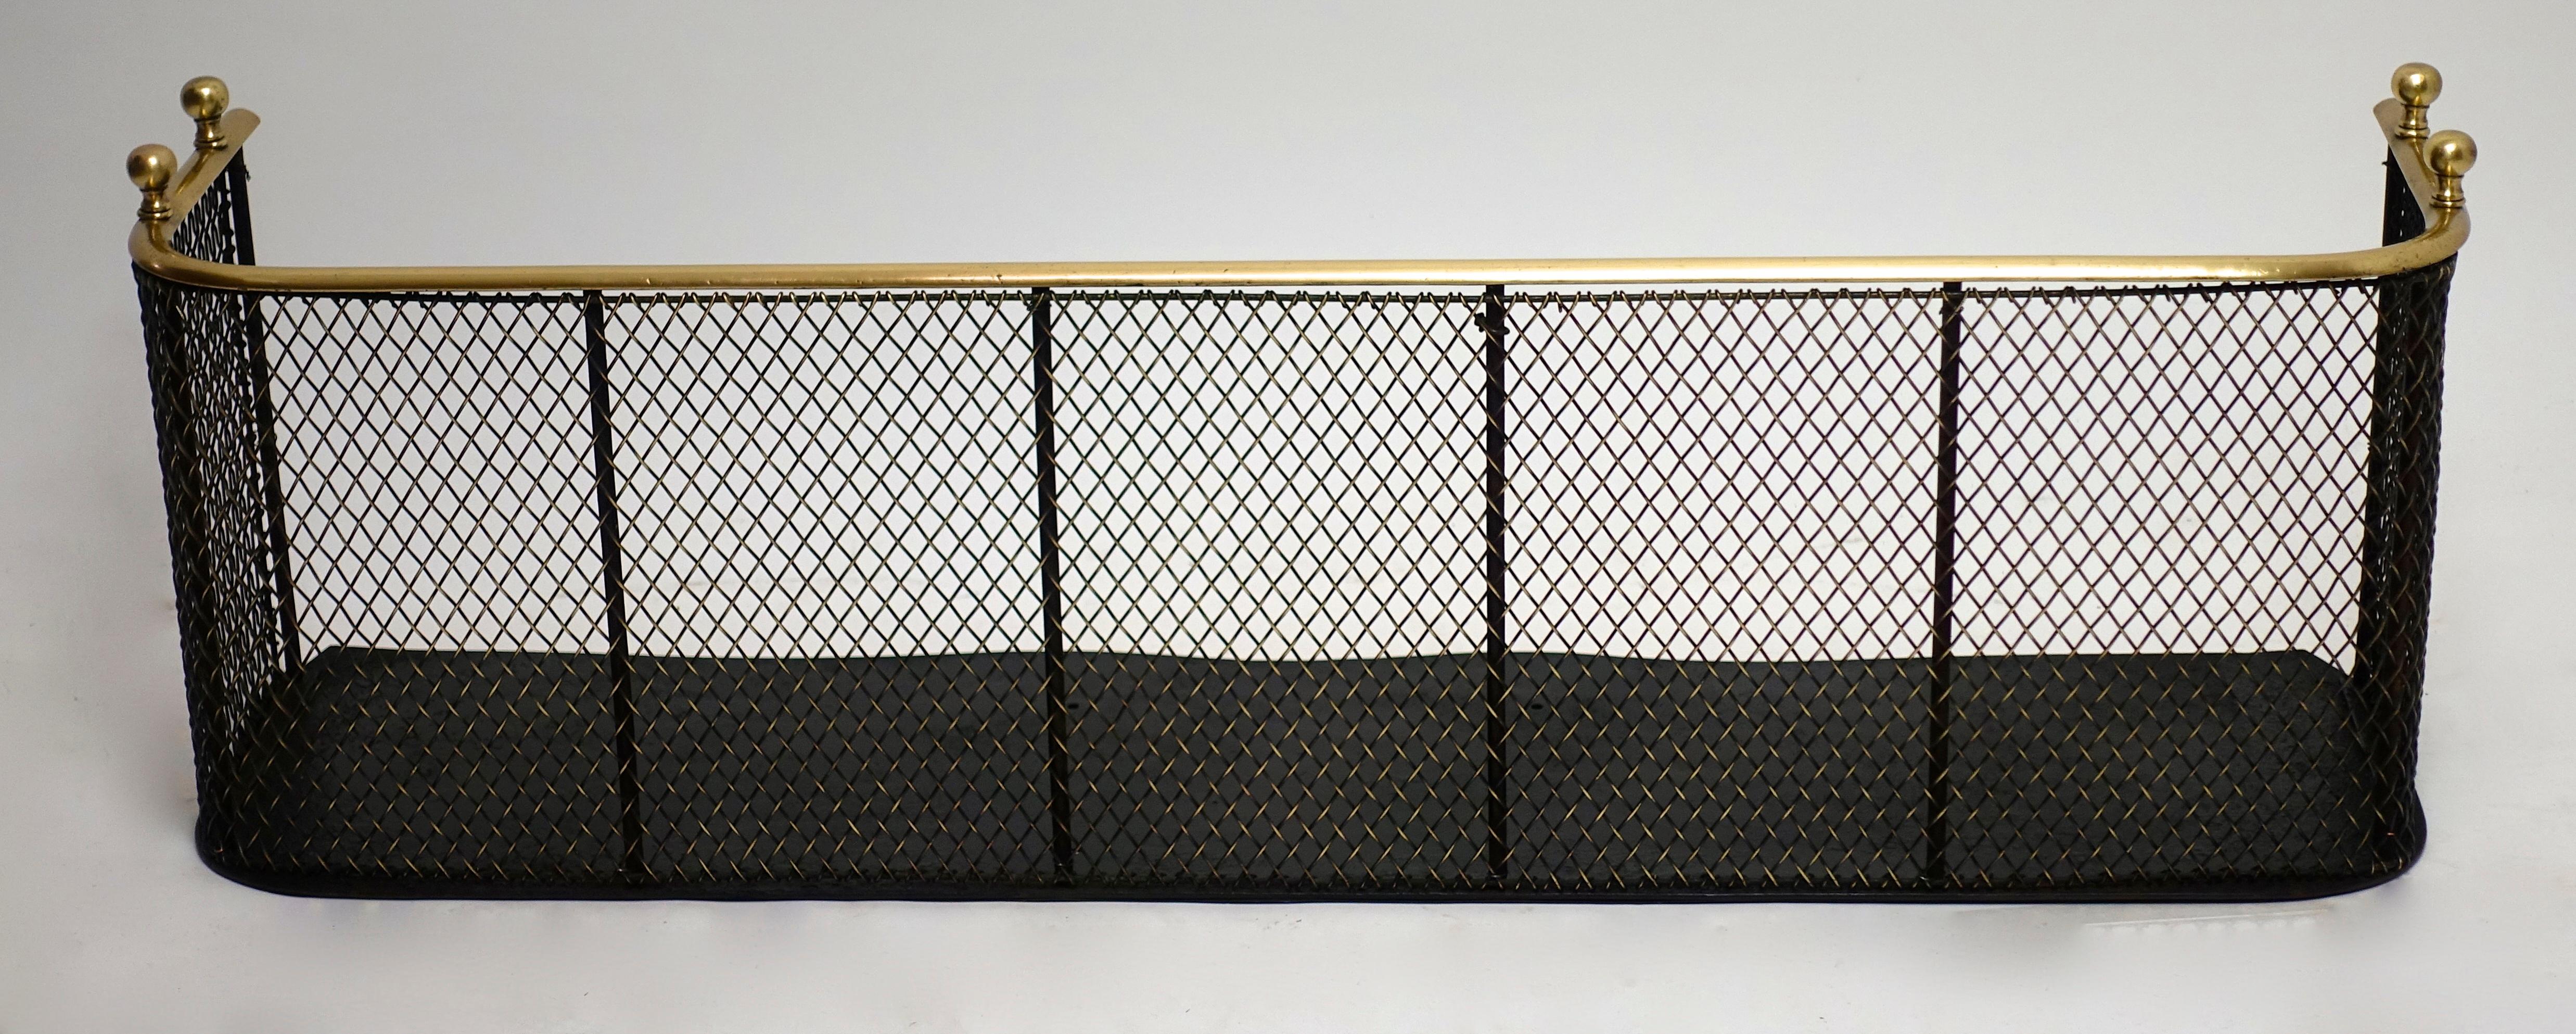 Handsome and useful English or American brass and black painted iron fire fender from the 
early 19th century with four finials with an unusual heavy brass mesh screen in
excellent antique condition.